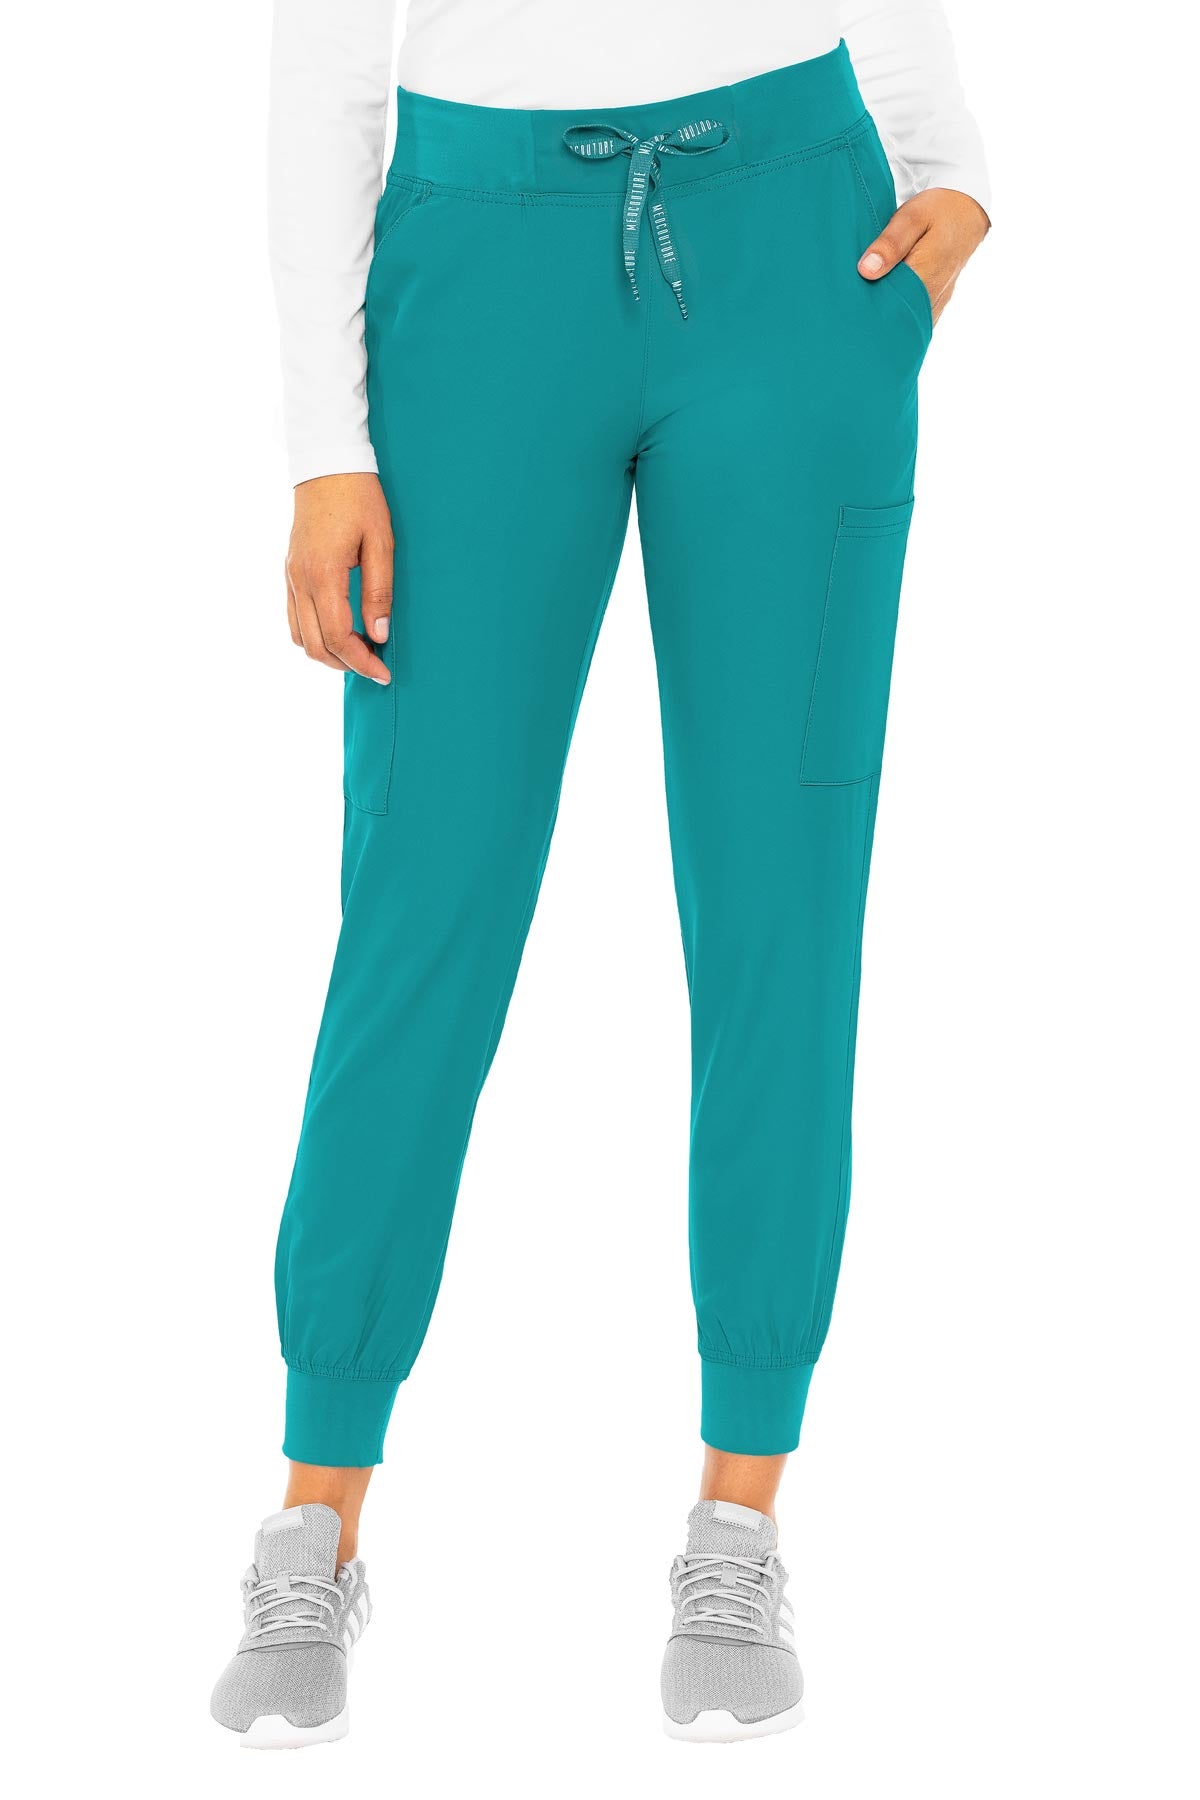 Med Couture 2711 Insight Women's Jogger Pant Teal